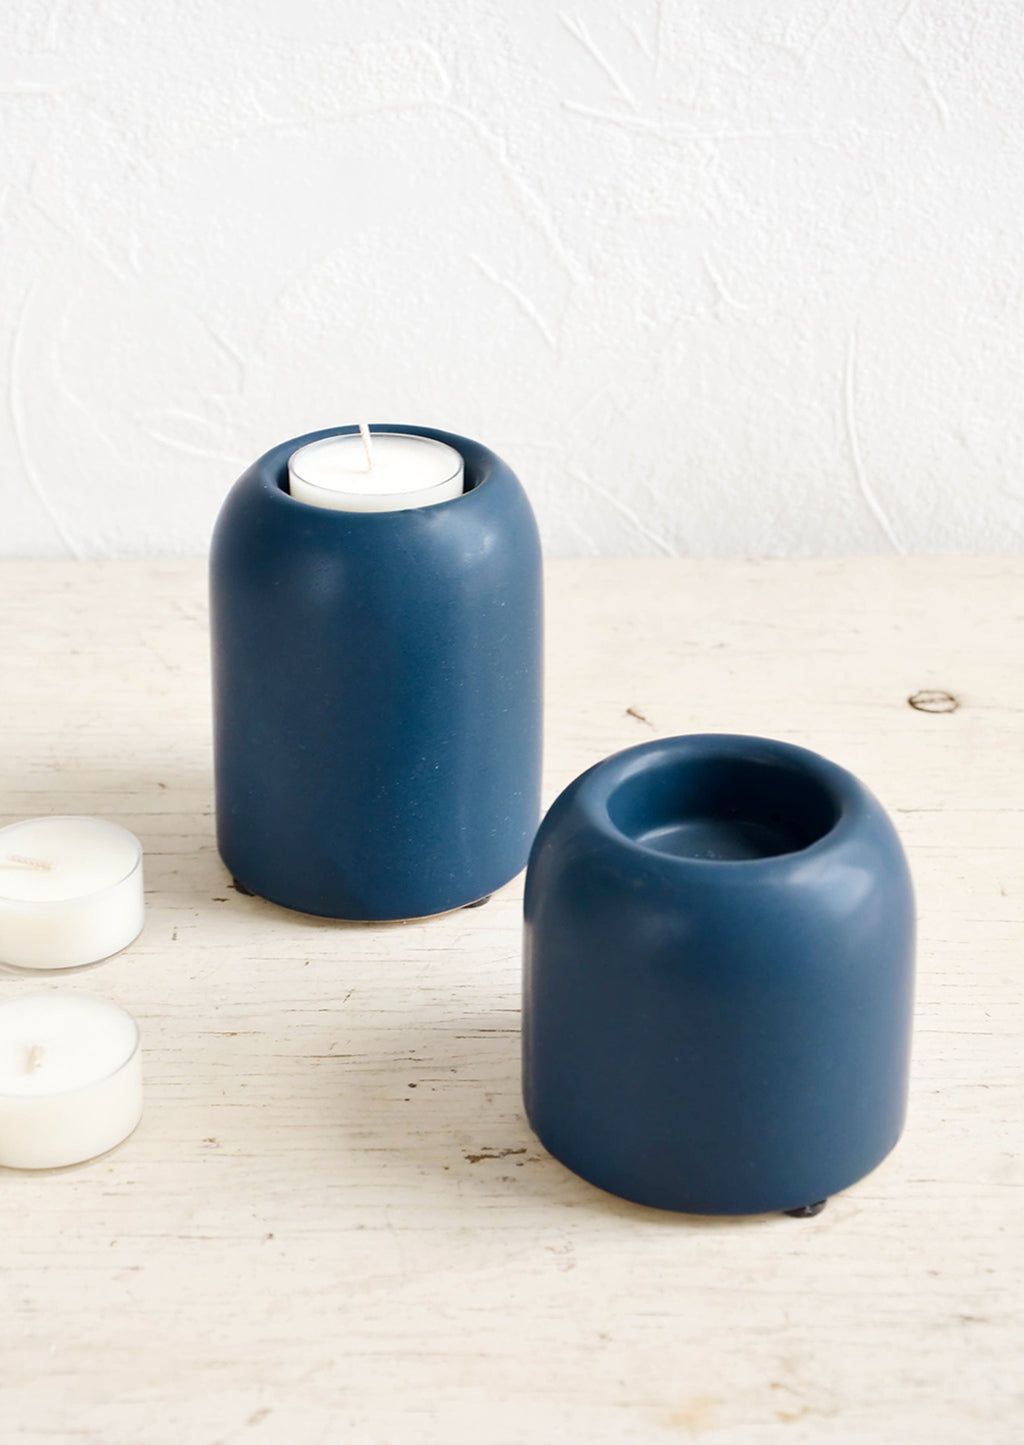 2: Ceramic tealight holders in jewel-tone blue, shown on table with tealights